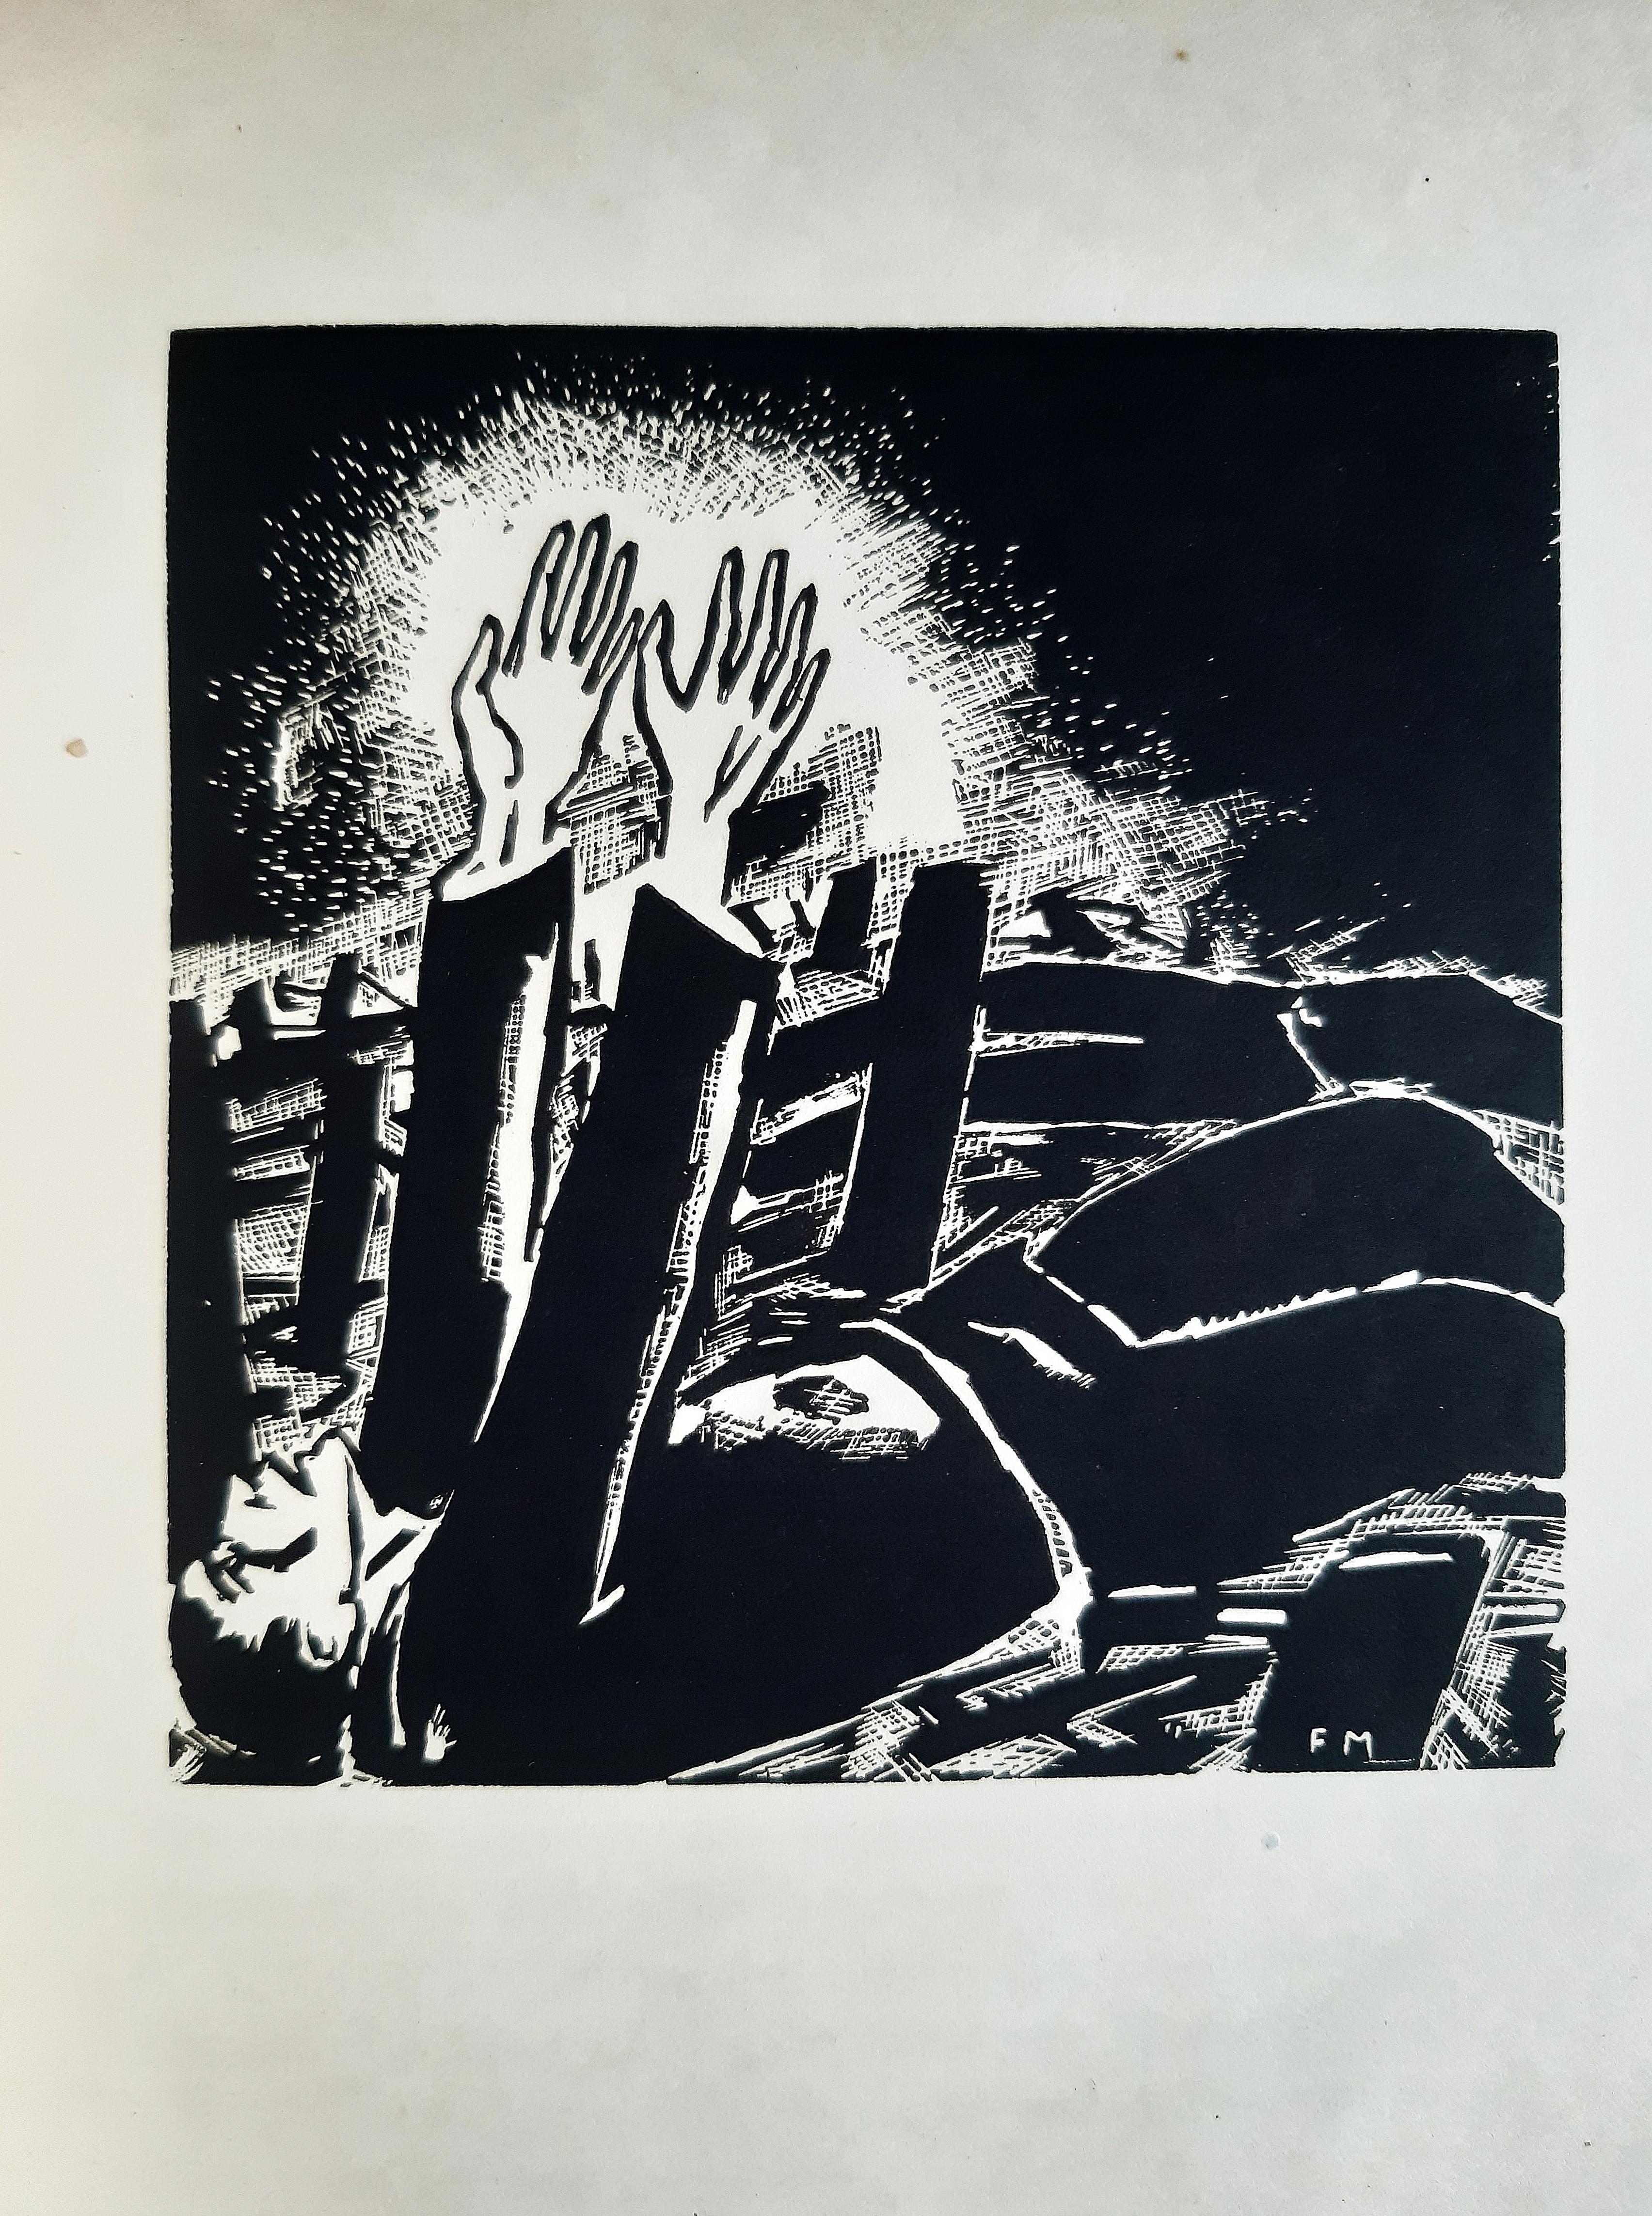 Die Mutter - Rare Book Illustrated by Frans Masereel - 1919 For Sale 3